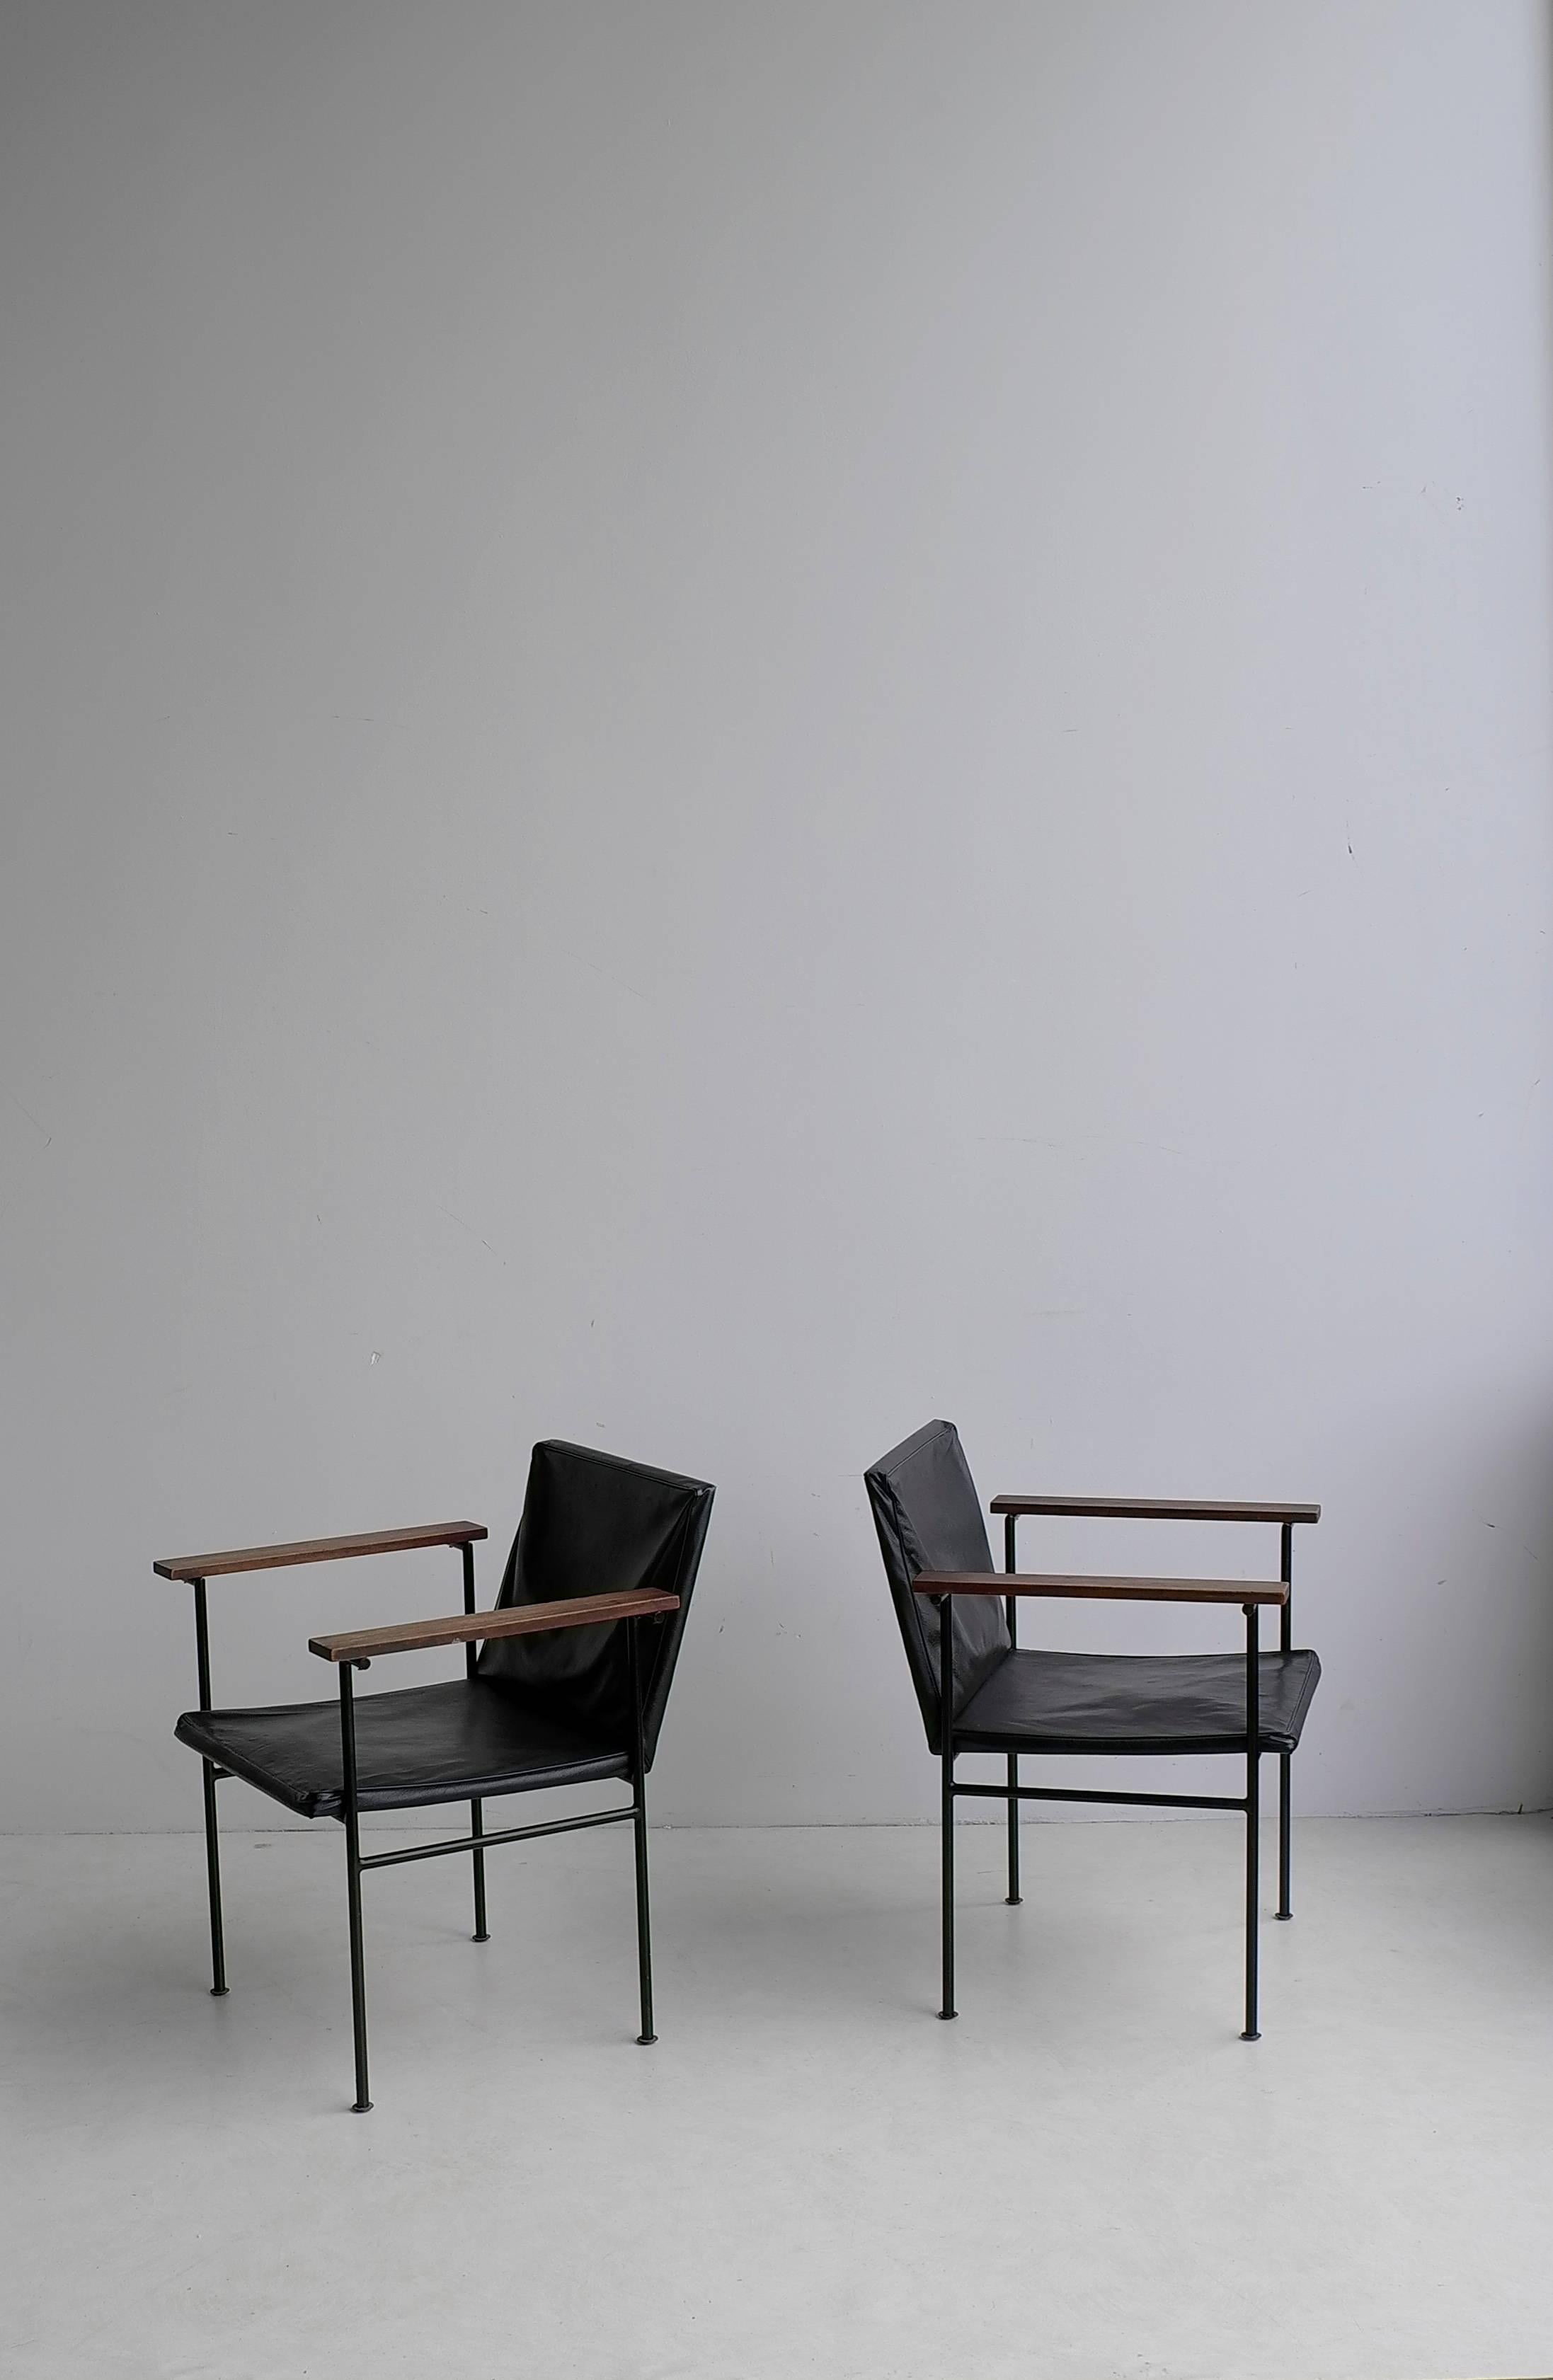 Pair of Minimal designed side chairs, France, 1950s.